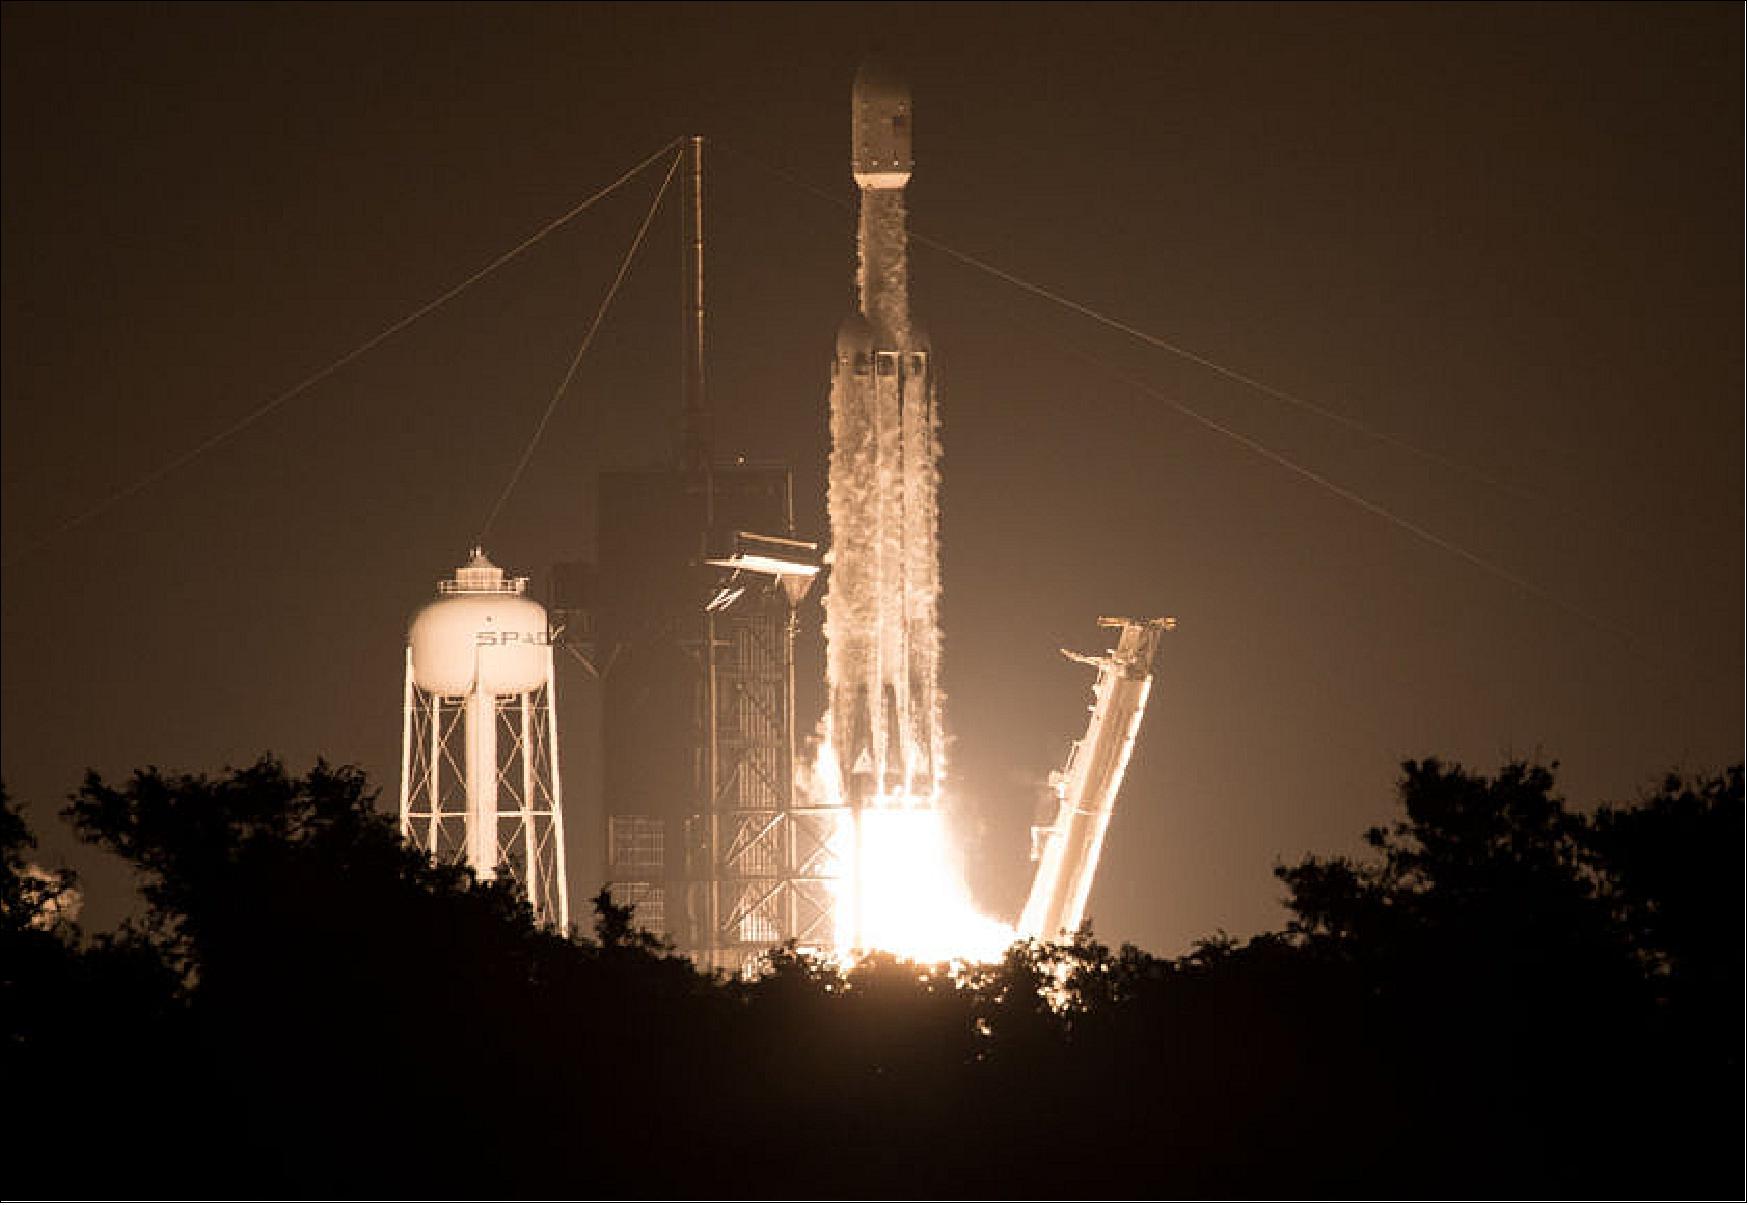 Figure 5: SpaceX's Falcon Heavy rocket, carrying GPIM and 23 other spacecraft for the U.S. Air Force's STP-2 mission, lifts off from Kennedy Space Center on 25 June 2019 at 06:30 UTC. The satellites include four NASA technology and science payloads that will study non-toxic spacecraft fuel, deep space navigation, 'bubbles' in the electrically-charged layers of Earth's upper atmosphere, and radiation protection for satellites (image credit: NASA) 14)